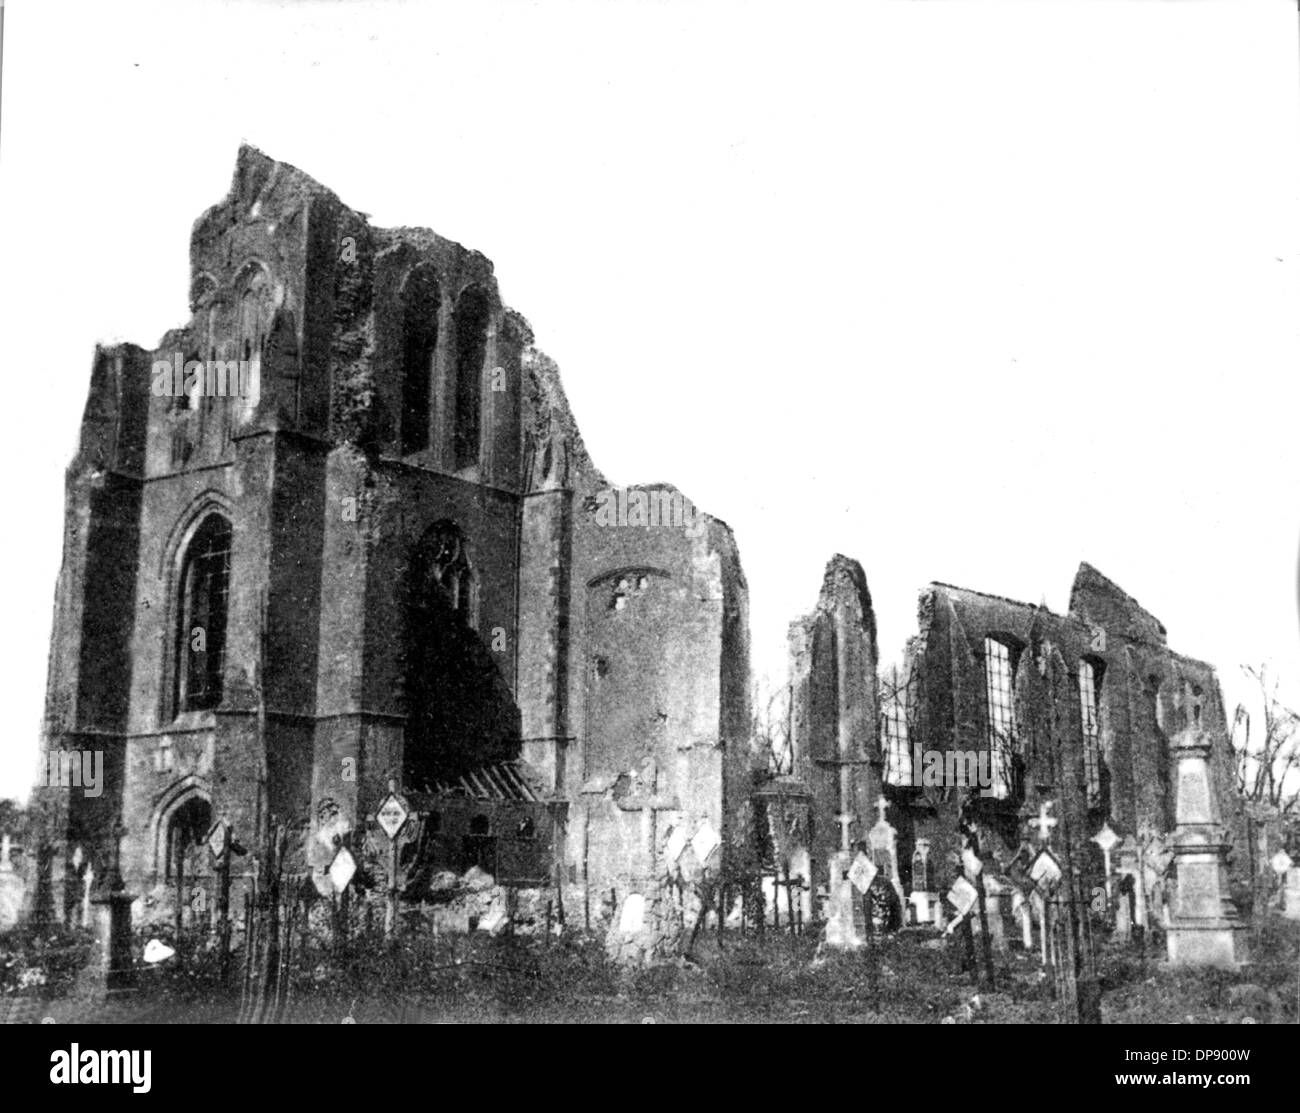 The ruin of the church of Langemark after escalade of German volunteers (picture taken in 1915). Set off by the deadly shots on Austrian heir to the throne Franz Ferdinand by Serbian nationalists on the 28th of June in 1914 in Sarajevo, World War I broke out. During World War I, Germany, Austria, Austria-Hungary as well as later Turkey and Bulgary fought against Britain, France and Russia. The sad end result in 1918 comprised roughly 8.5 million soldiers killed in action, more than 21 million wounded and almost 8 million prisoners of war and missing people. Stock Photo